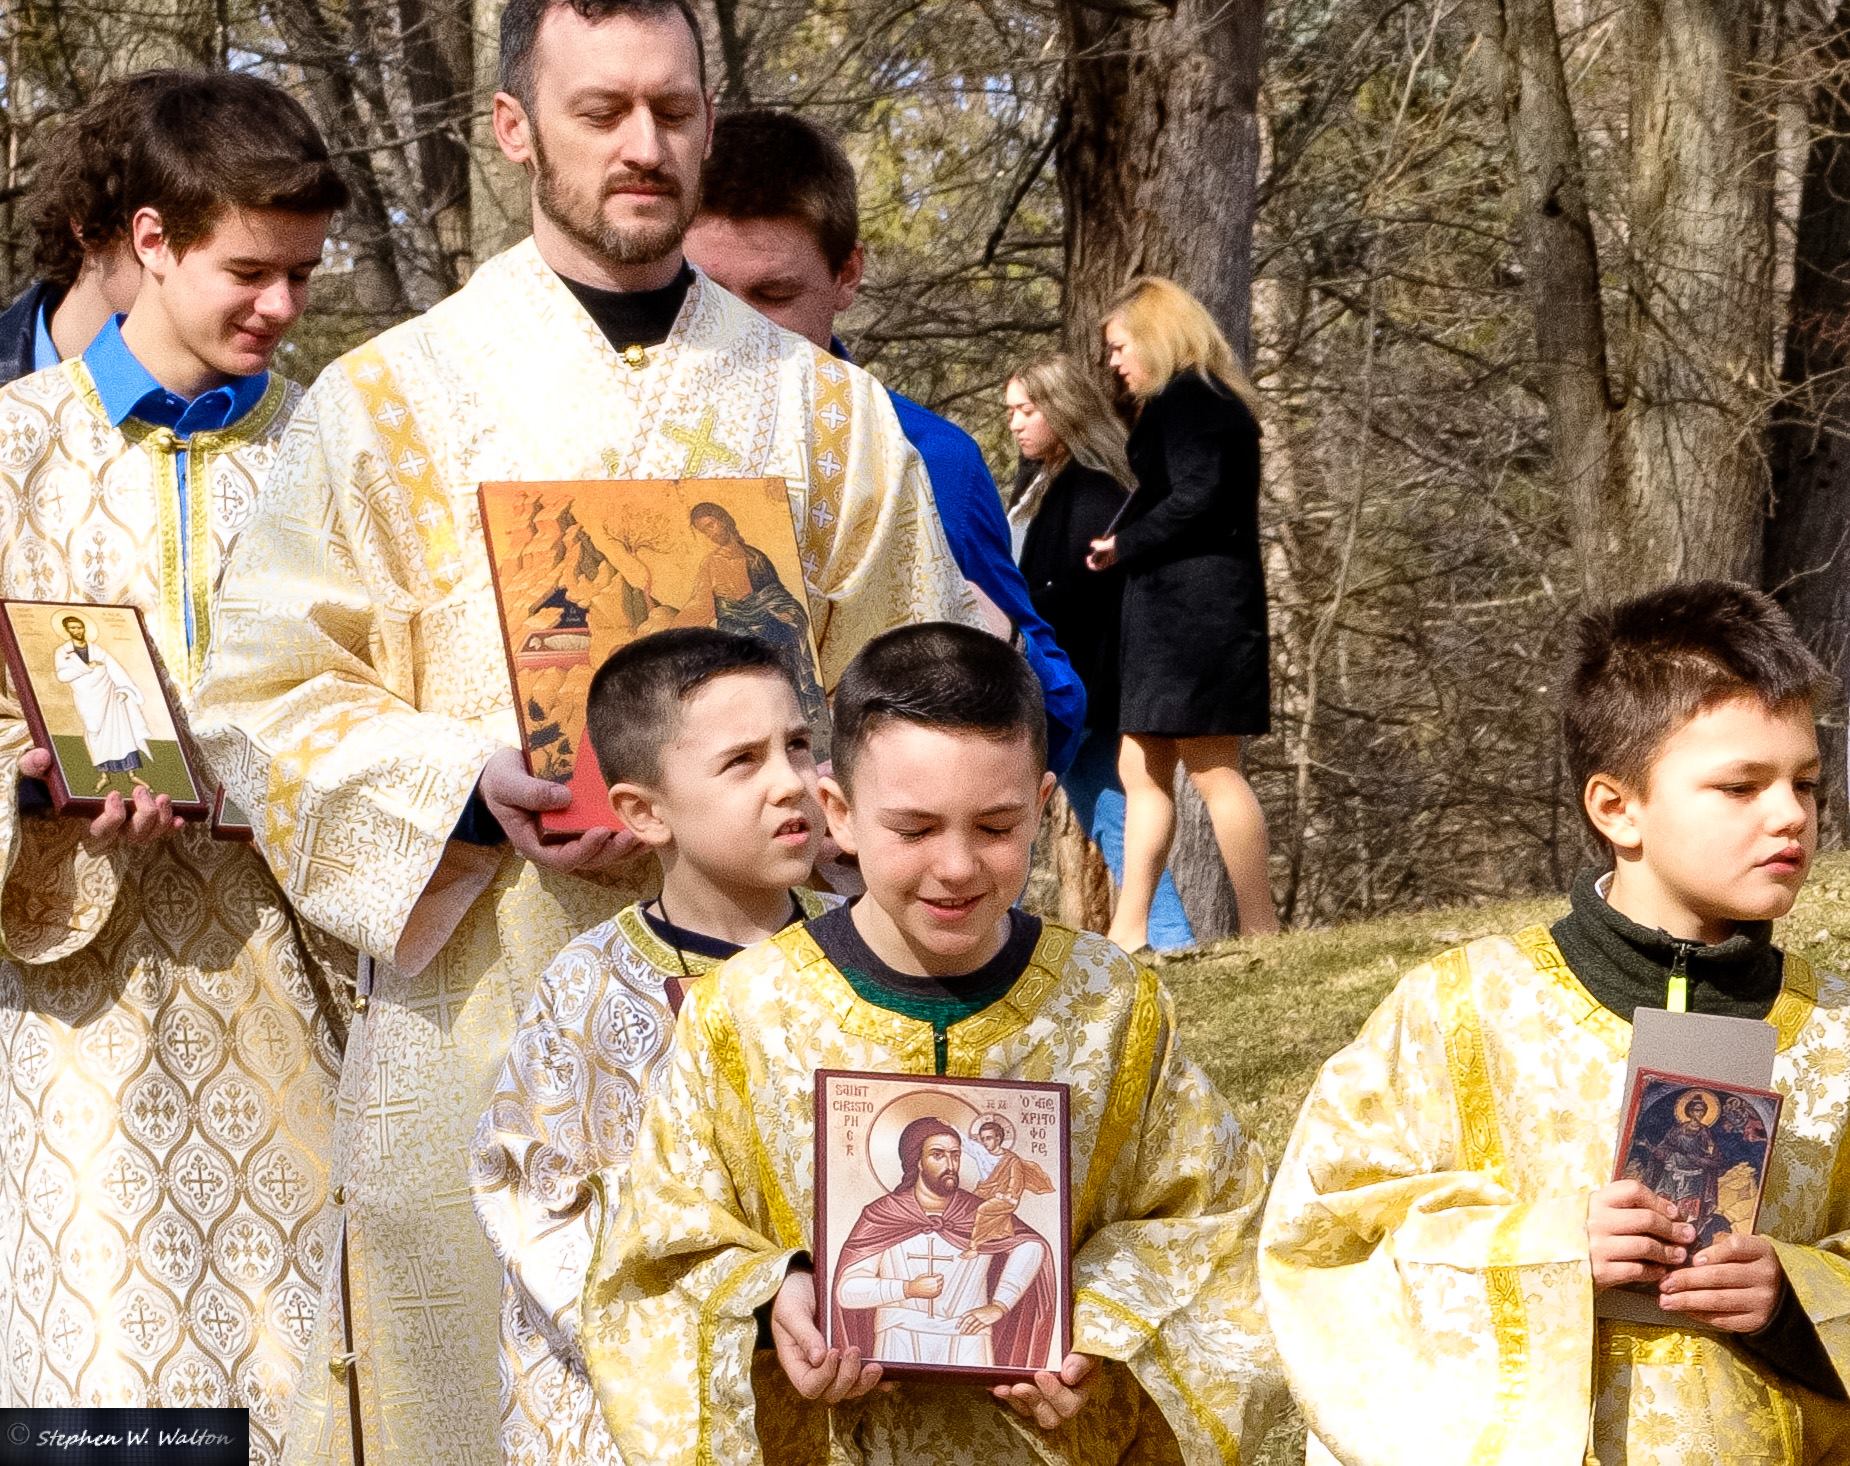  older altar servers behind young altar servers in procession outside holding icons 